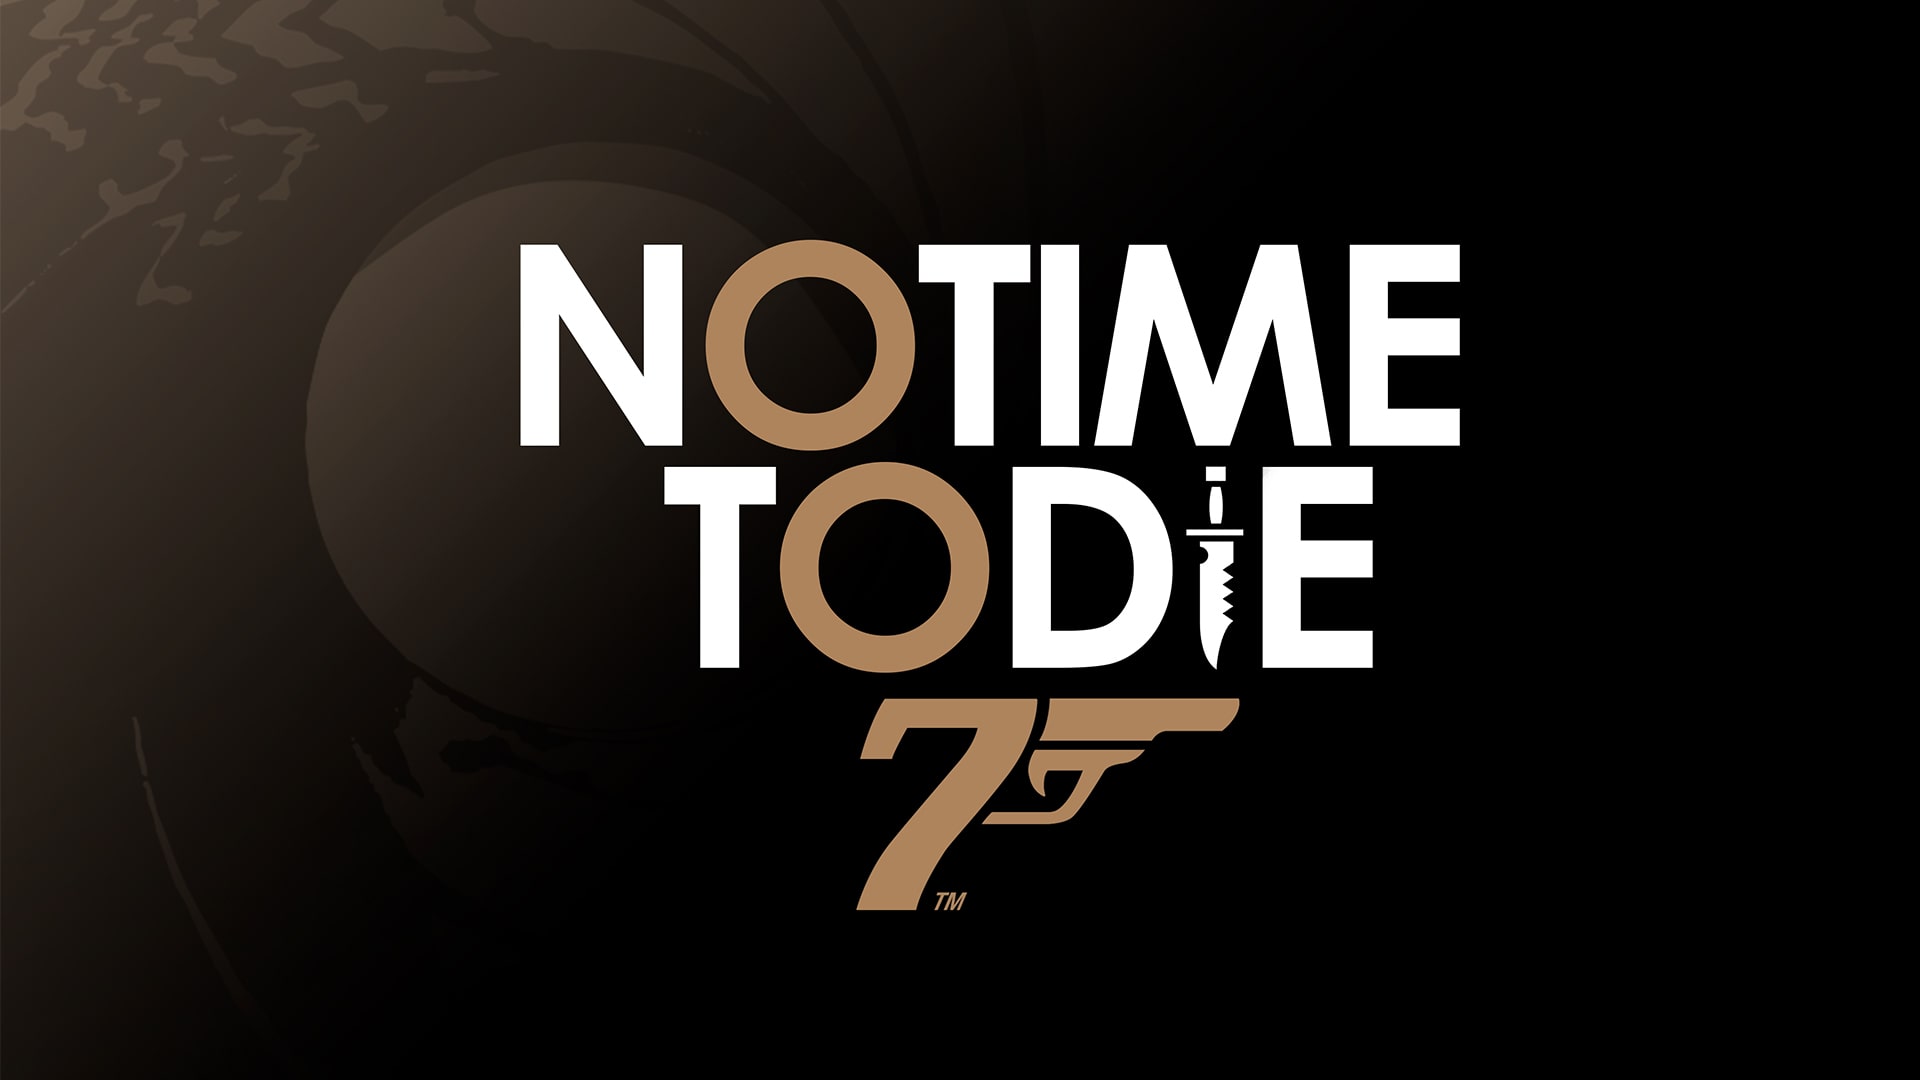 James Bond No Time To Die Delayed. Again